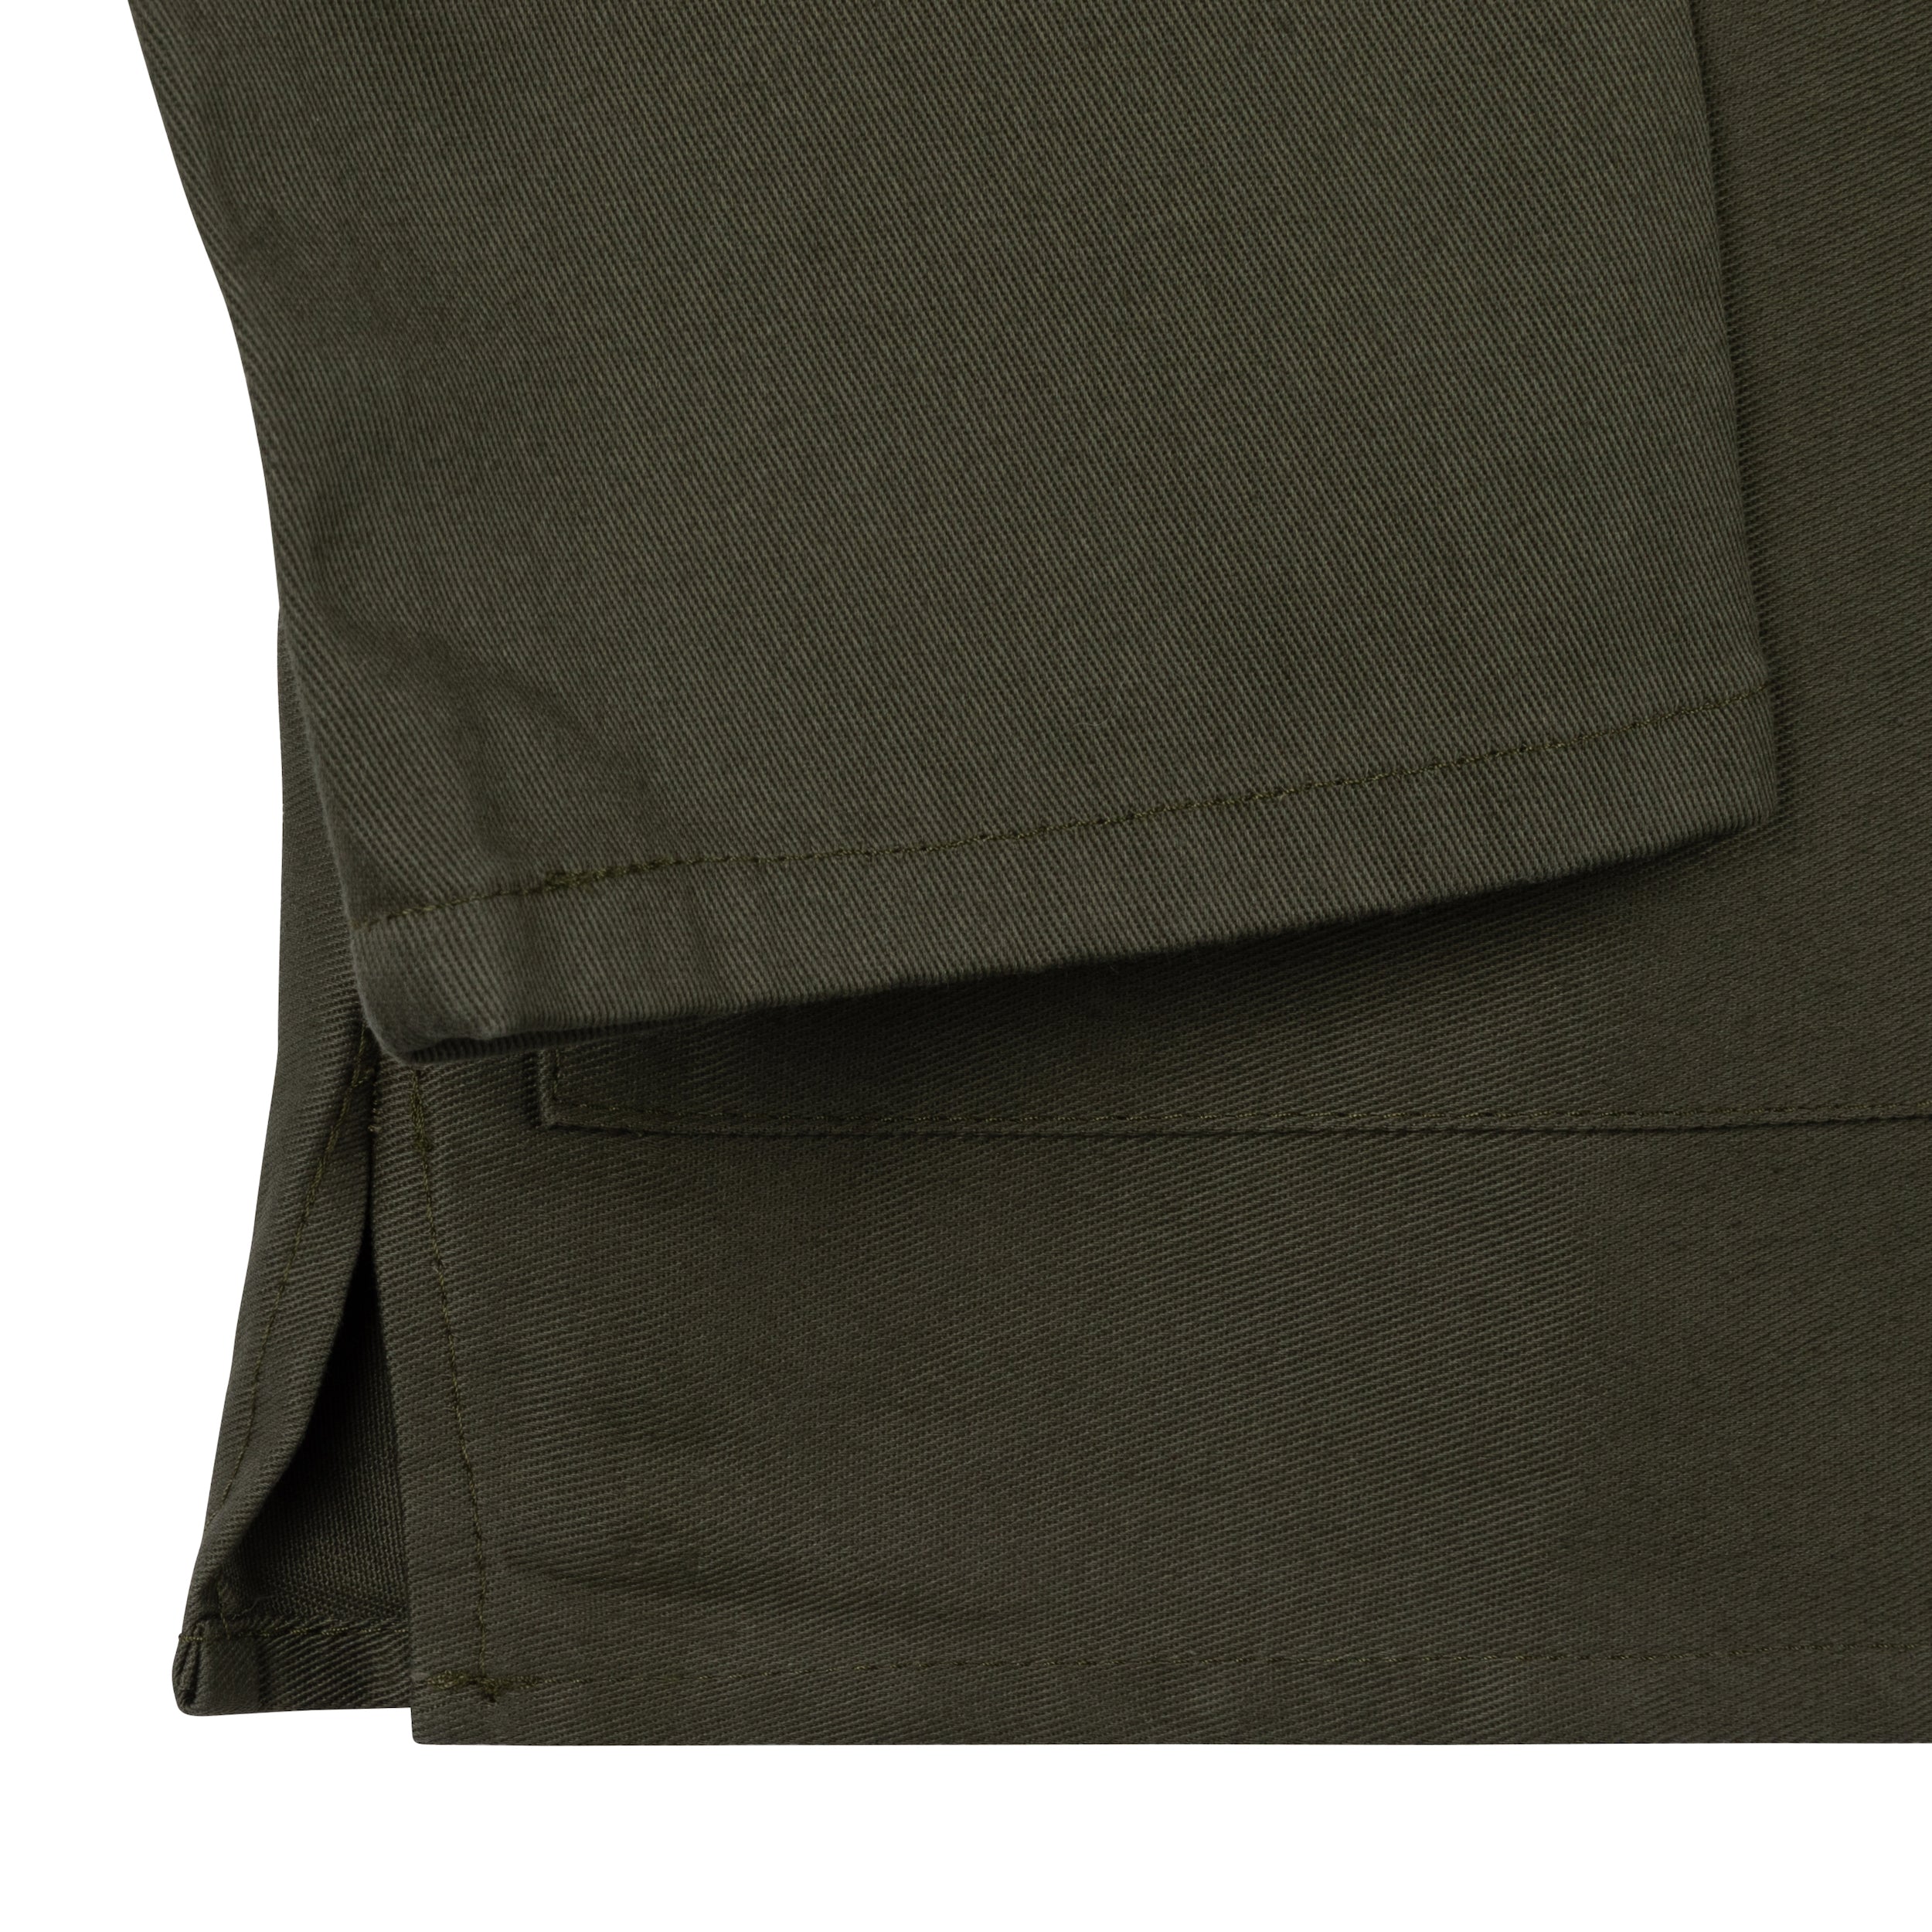 Carrier Company traditional Norfolk Slop in Olive